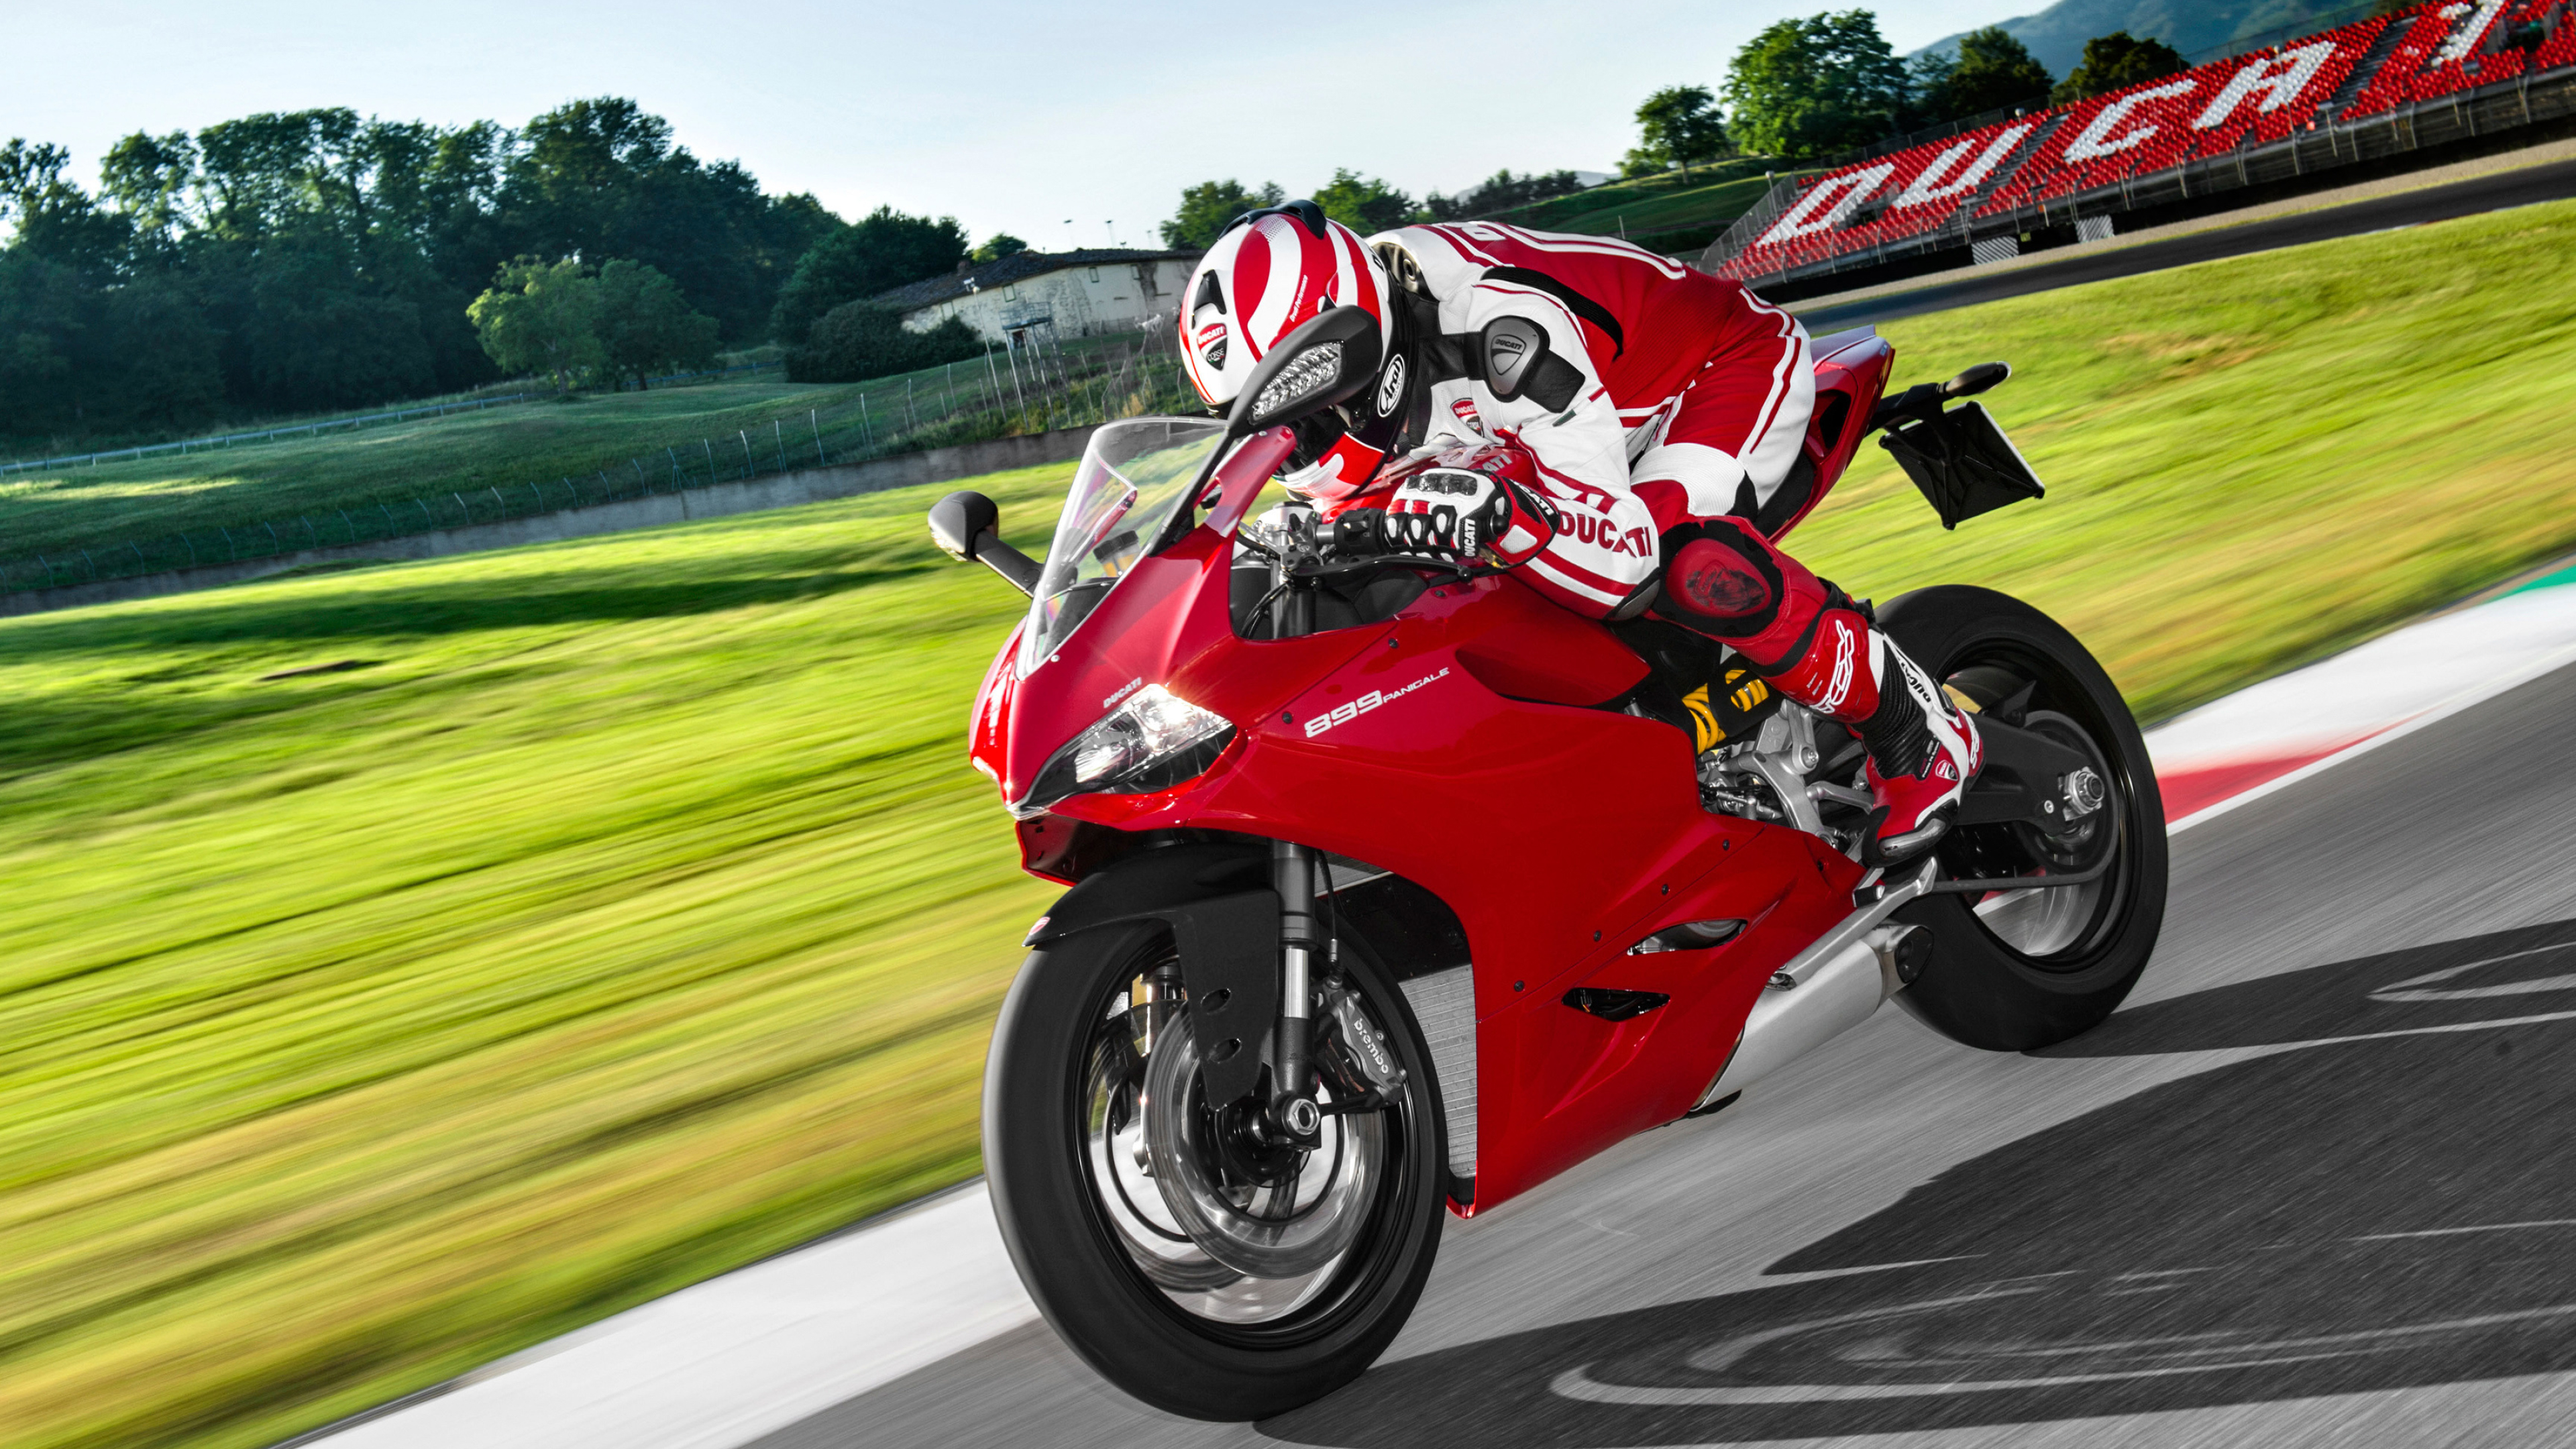 Superbike: Ducati 899 Panigale in action, A professional moto racer, Ducati Corse team. 3840x2160 4K Background.